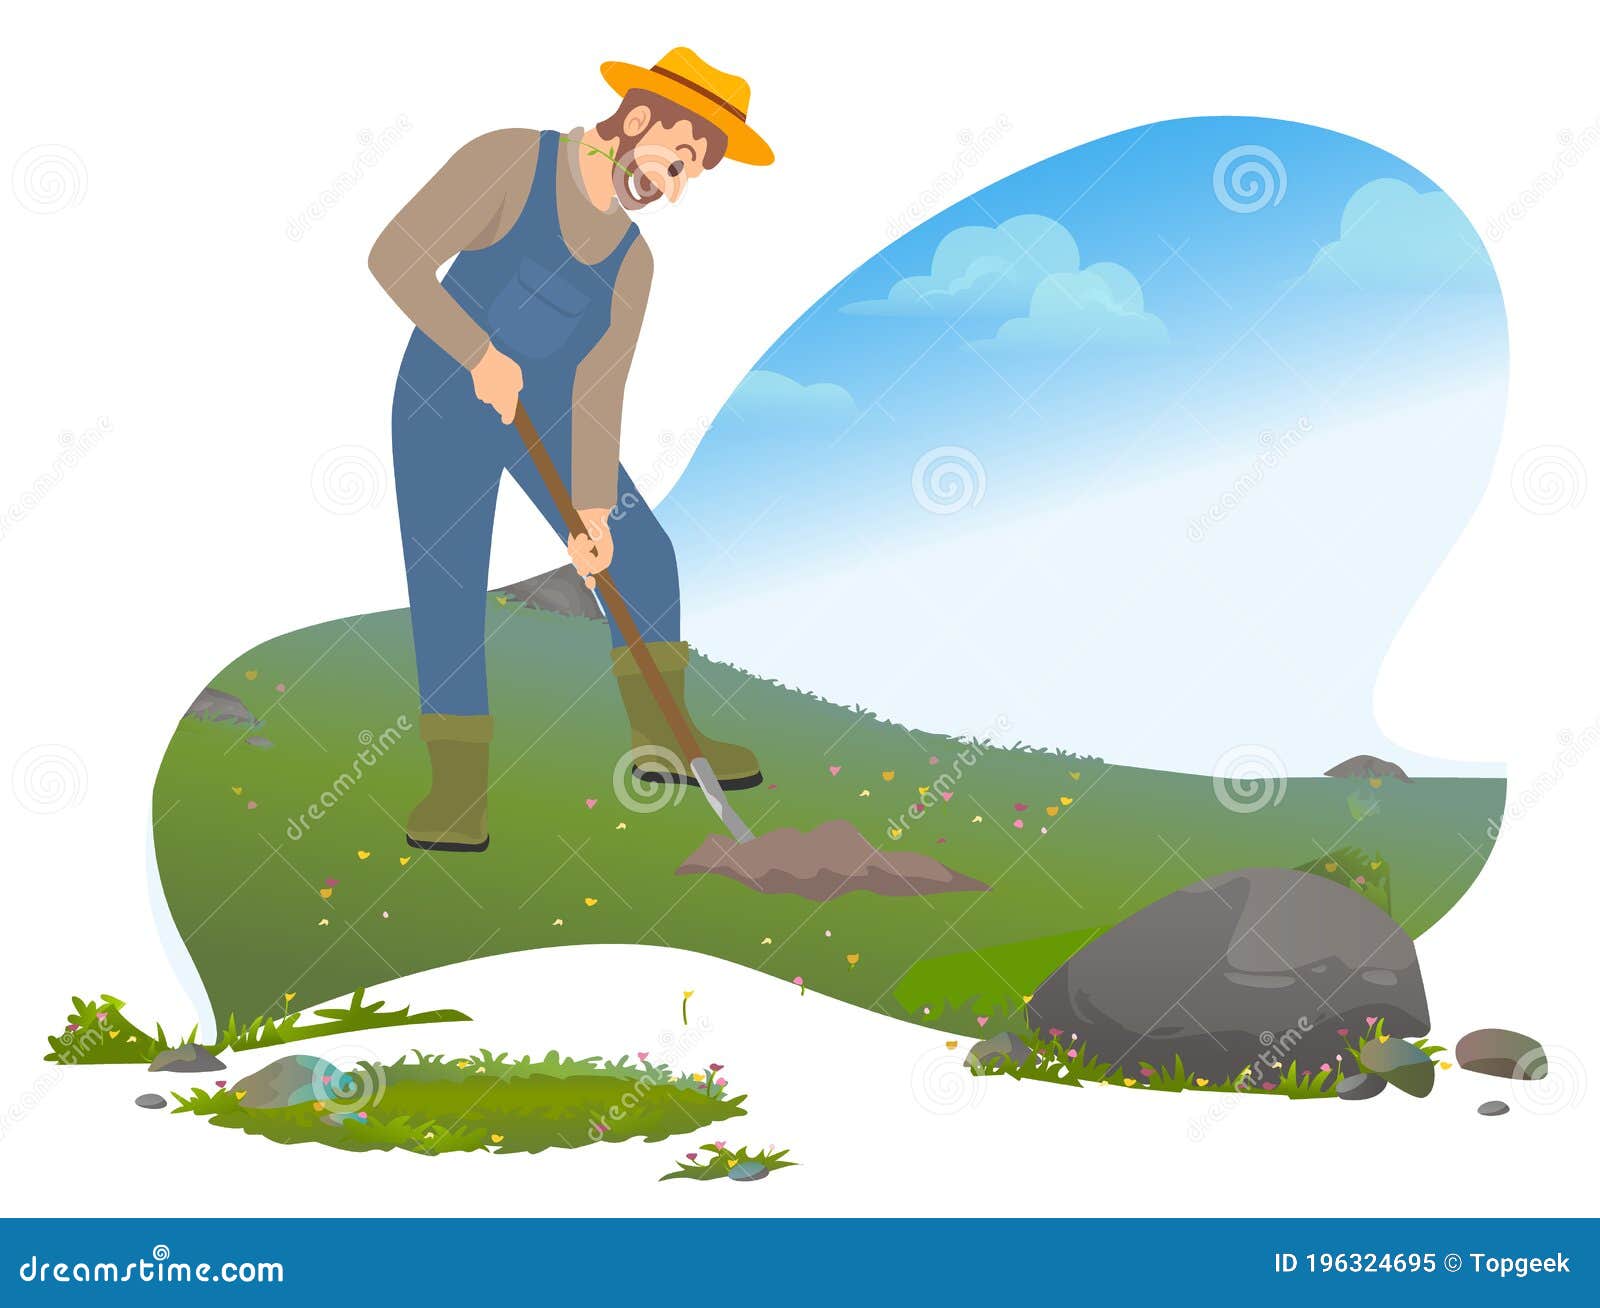 Man with Shovel Digging a Hole Illustration. Man Digs a Hole in the ...